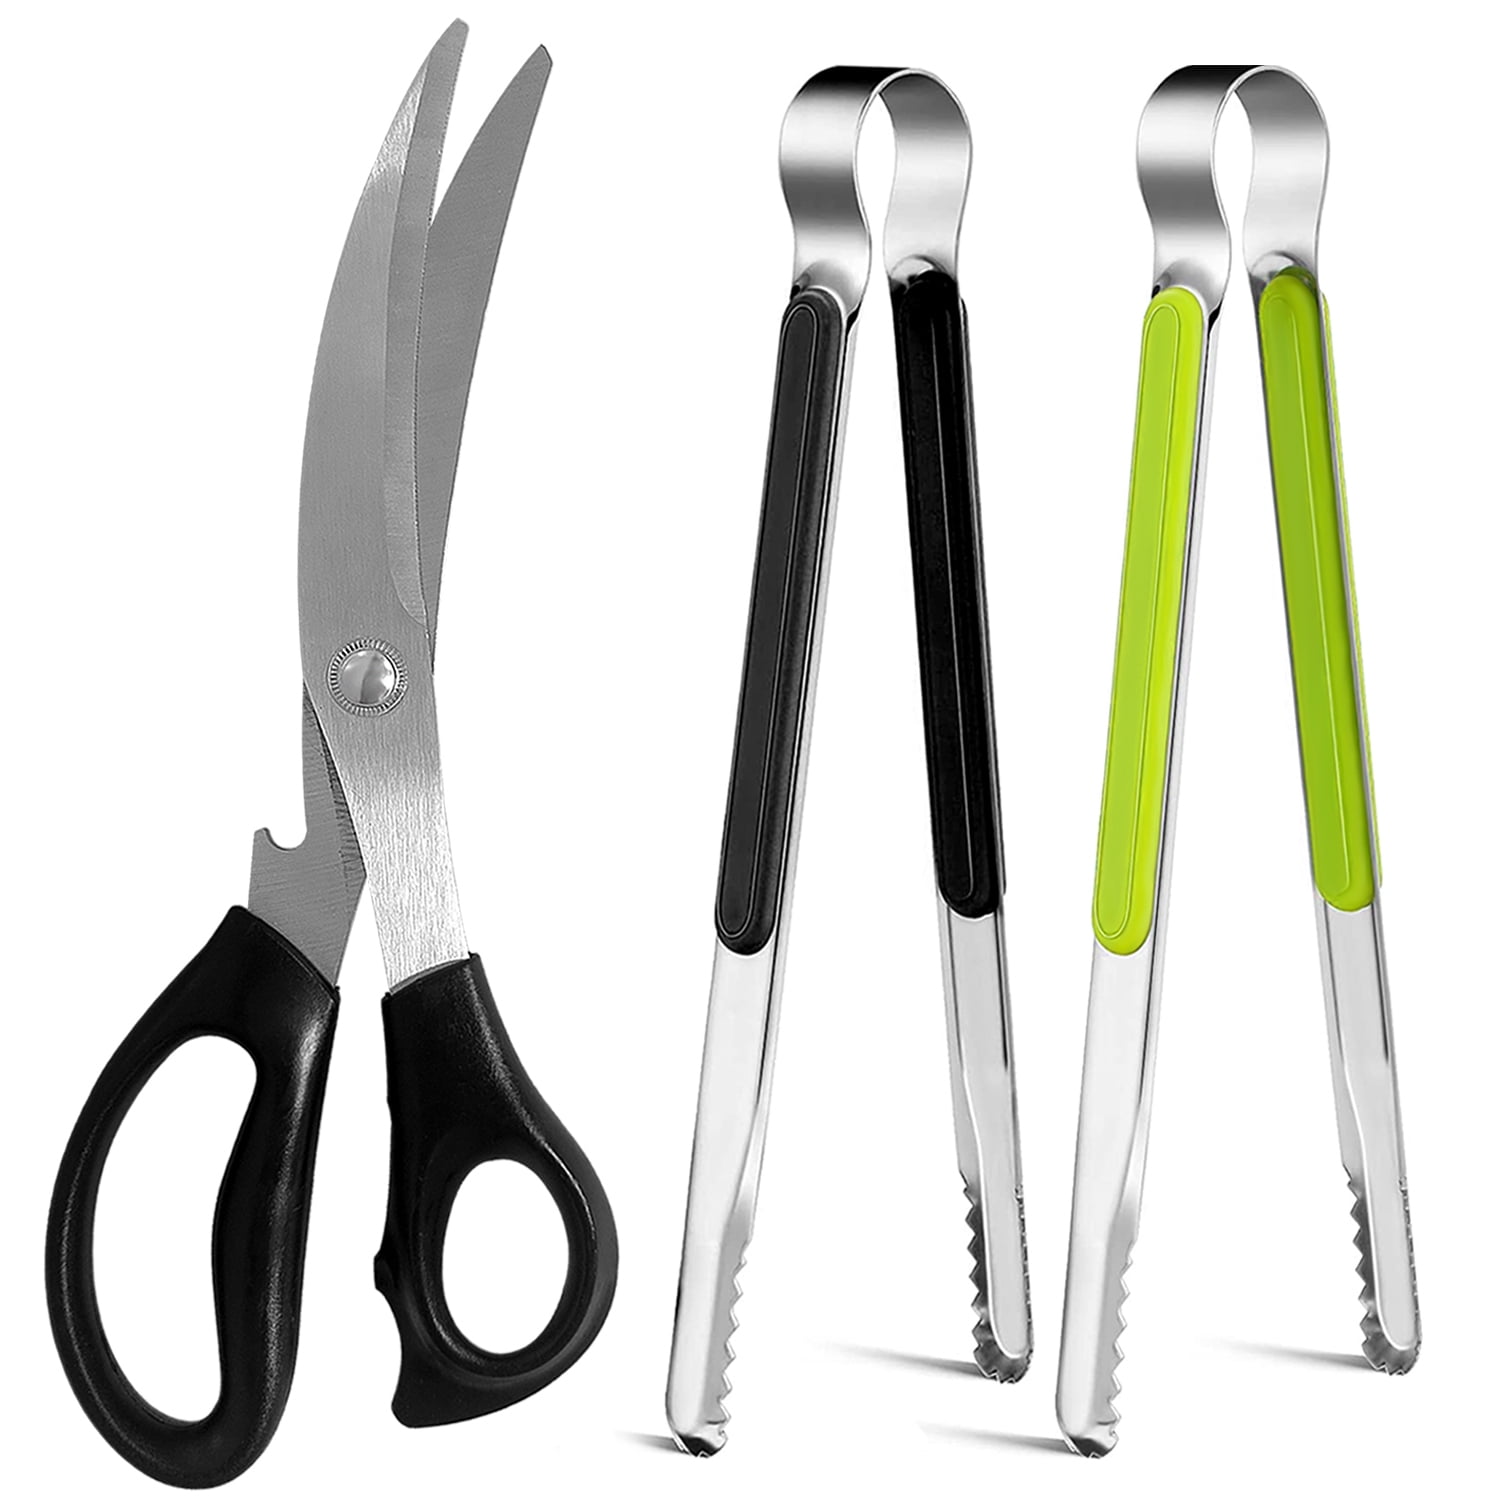 Ggomi Korean Barbecue Kalbi Rib Meat Cutting Shears/Serrated 3T  Blade/Quality Stainless Steel Scissors Large 10 1/4 Inches